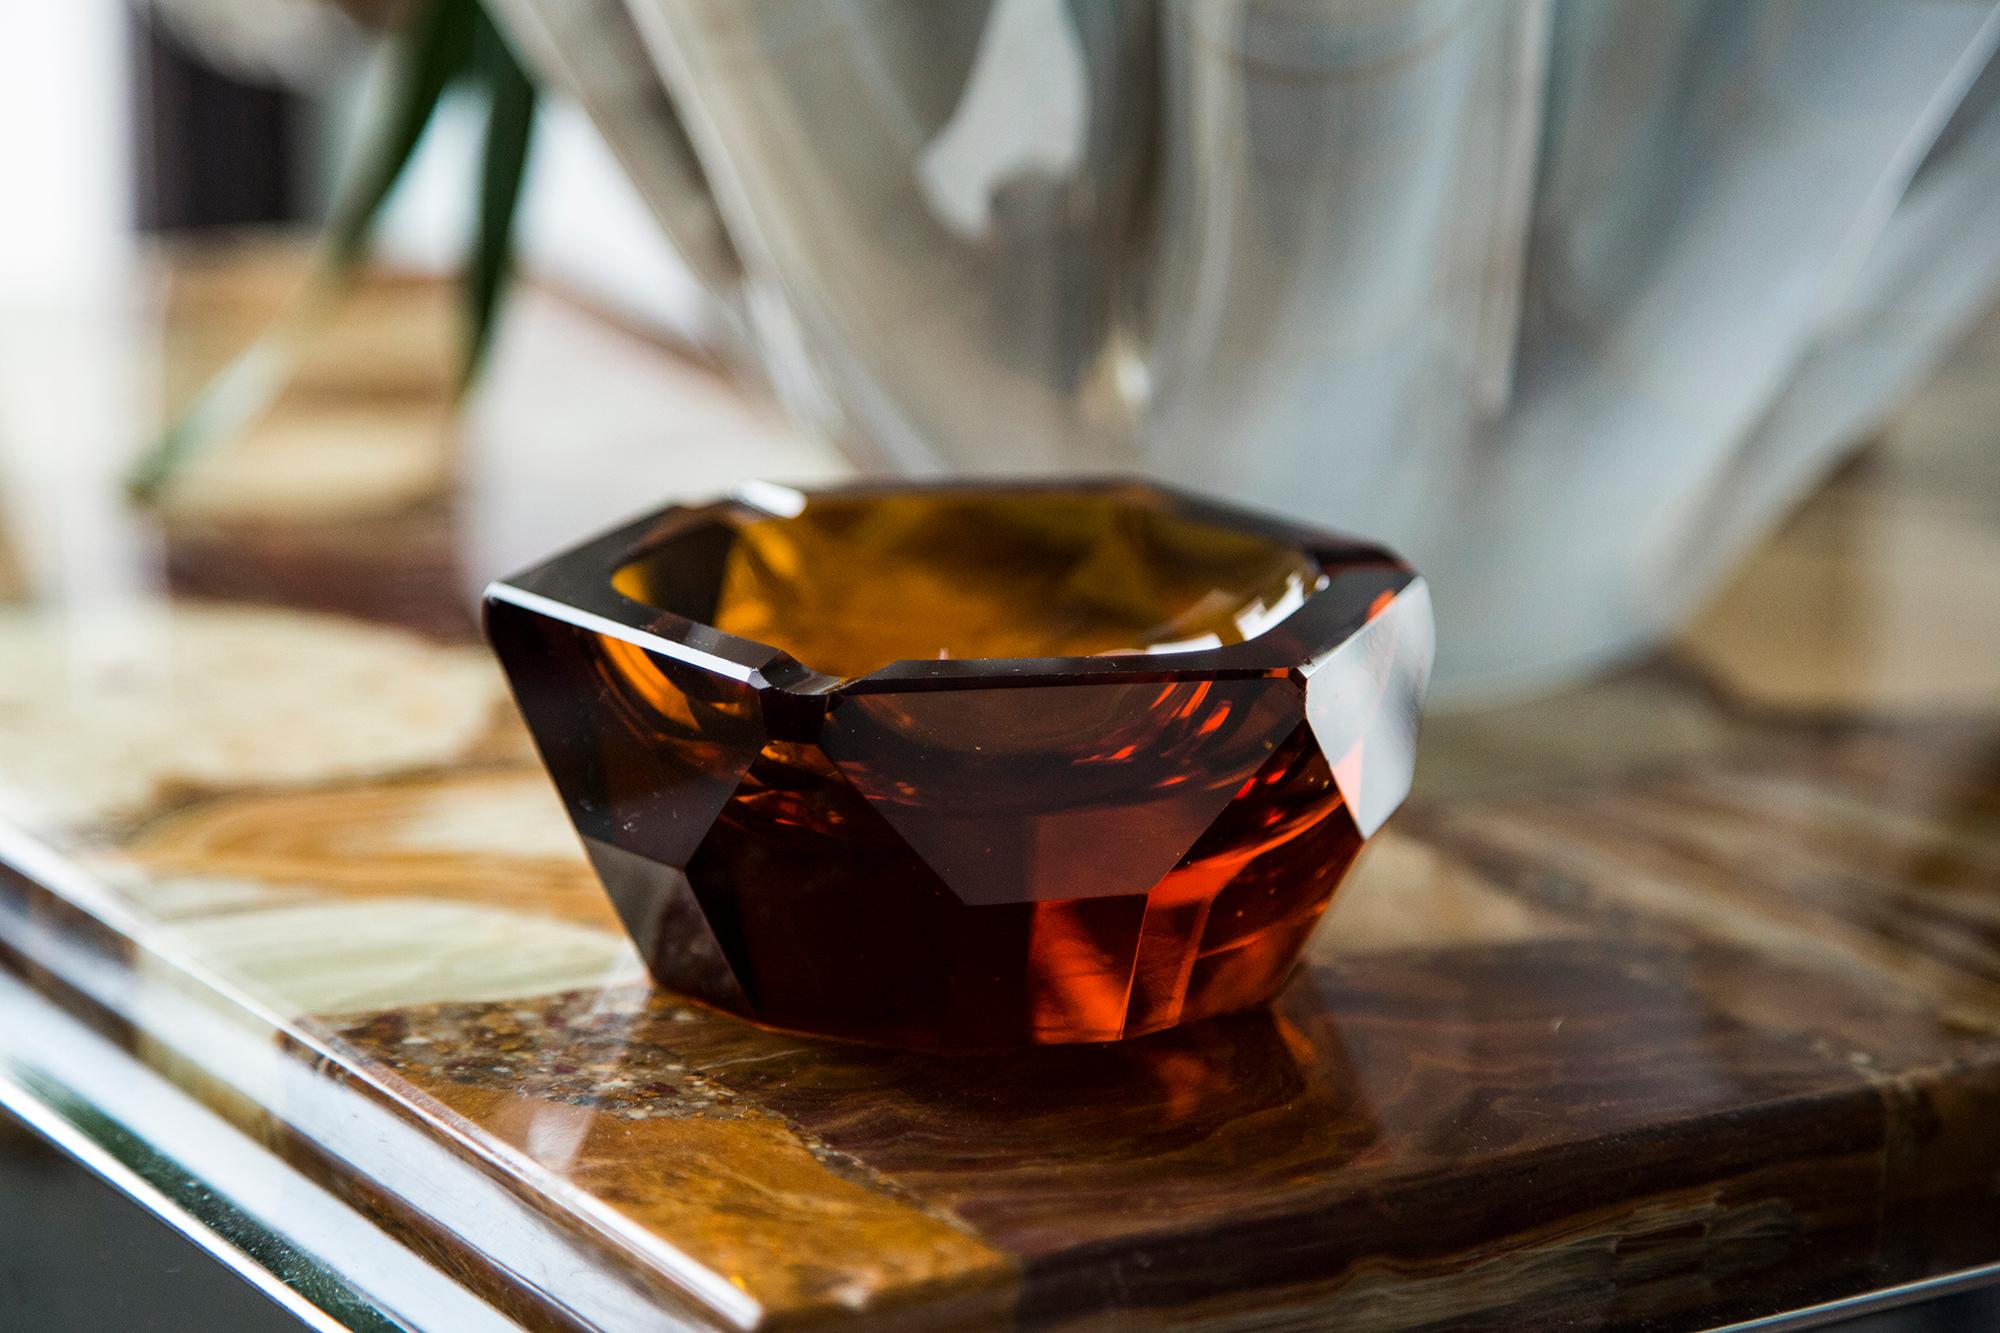 This original vintage glass element was designed and produced in the 1970s in Lombardia, Italy. It is made in Sommerso Technique and has a fantastic faceted form. The vibrant color makes this items highly decorative. This item is a high quality